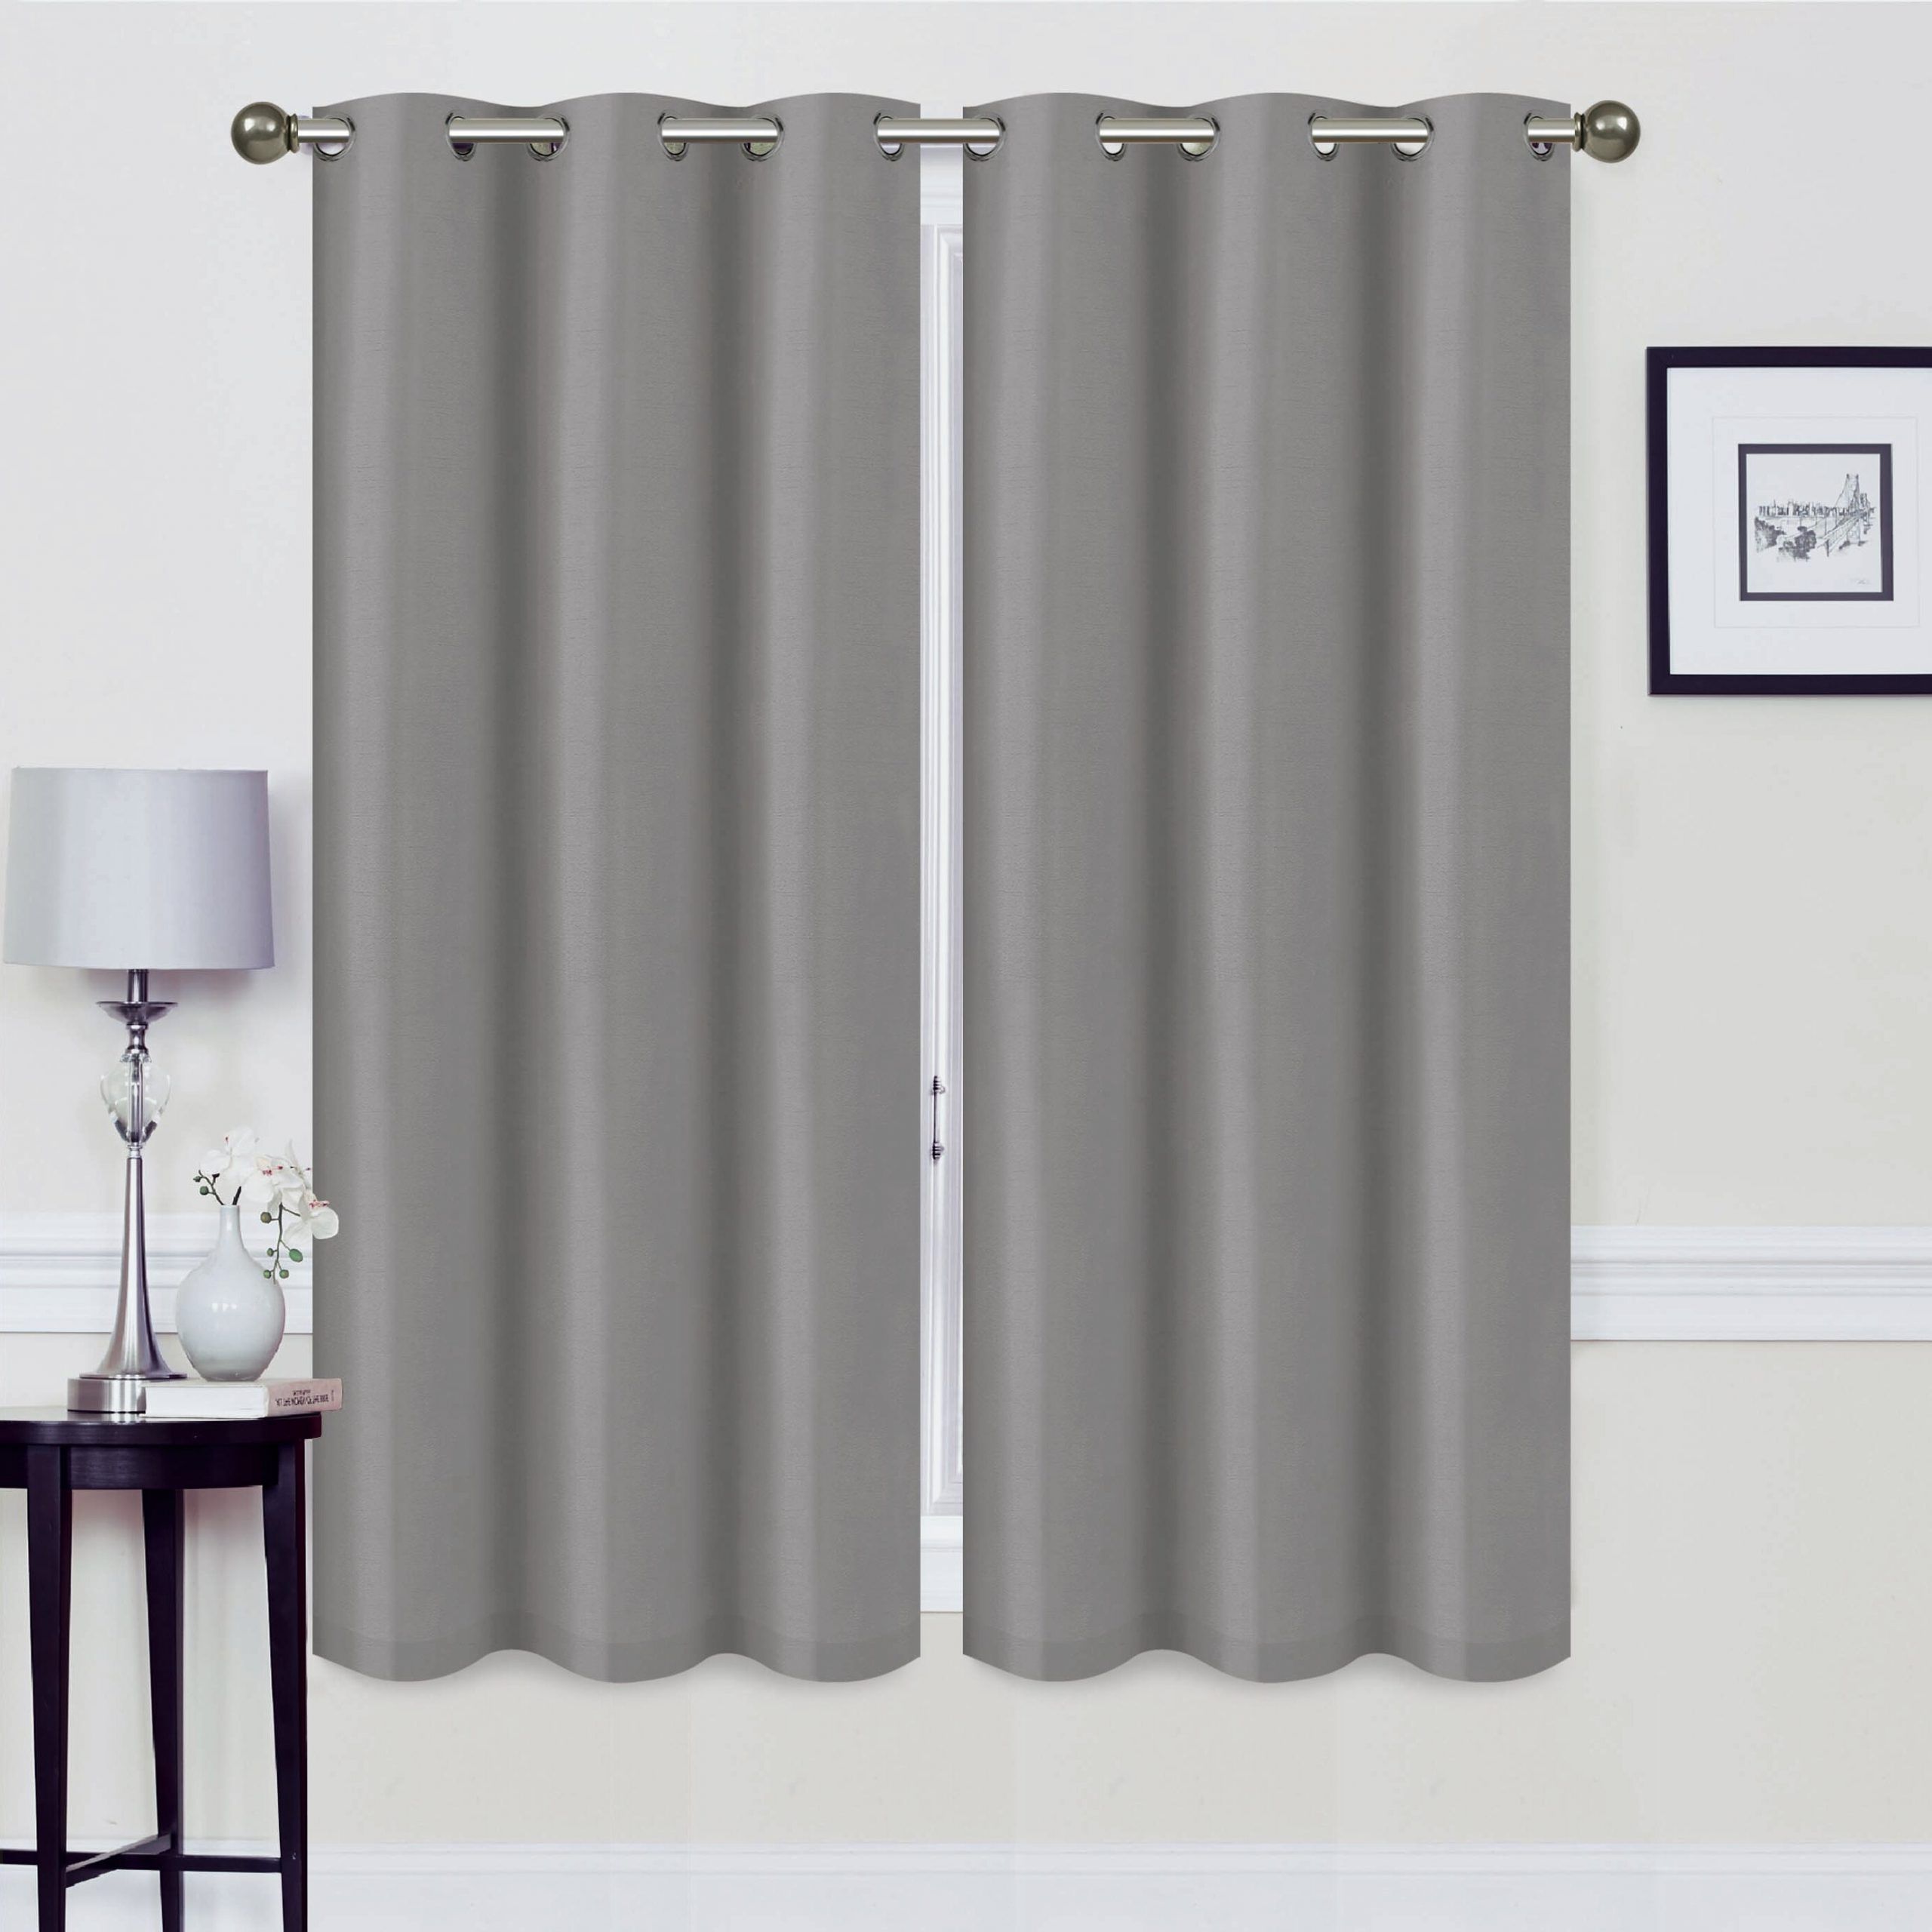 Best And Newest Ultimate Blackout Short Length Grommet Curtain Panels In Alvina Solid Blackout Thermal Grommet Curtain Panels (View 20 of 20)